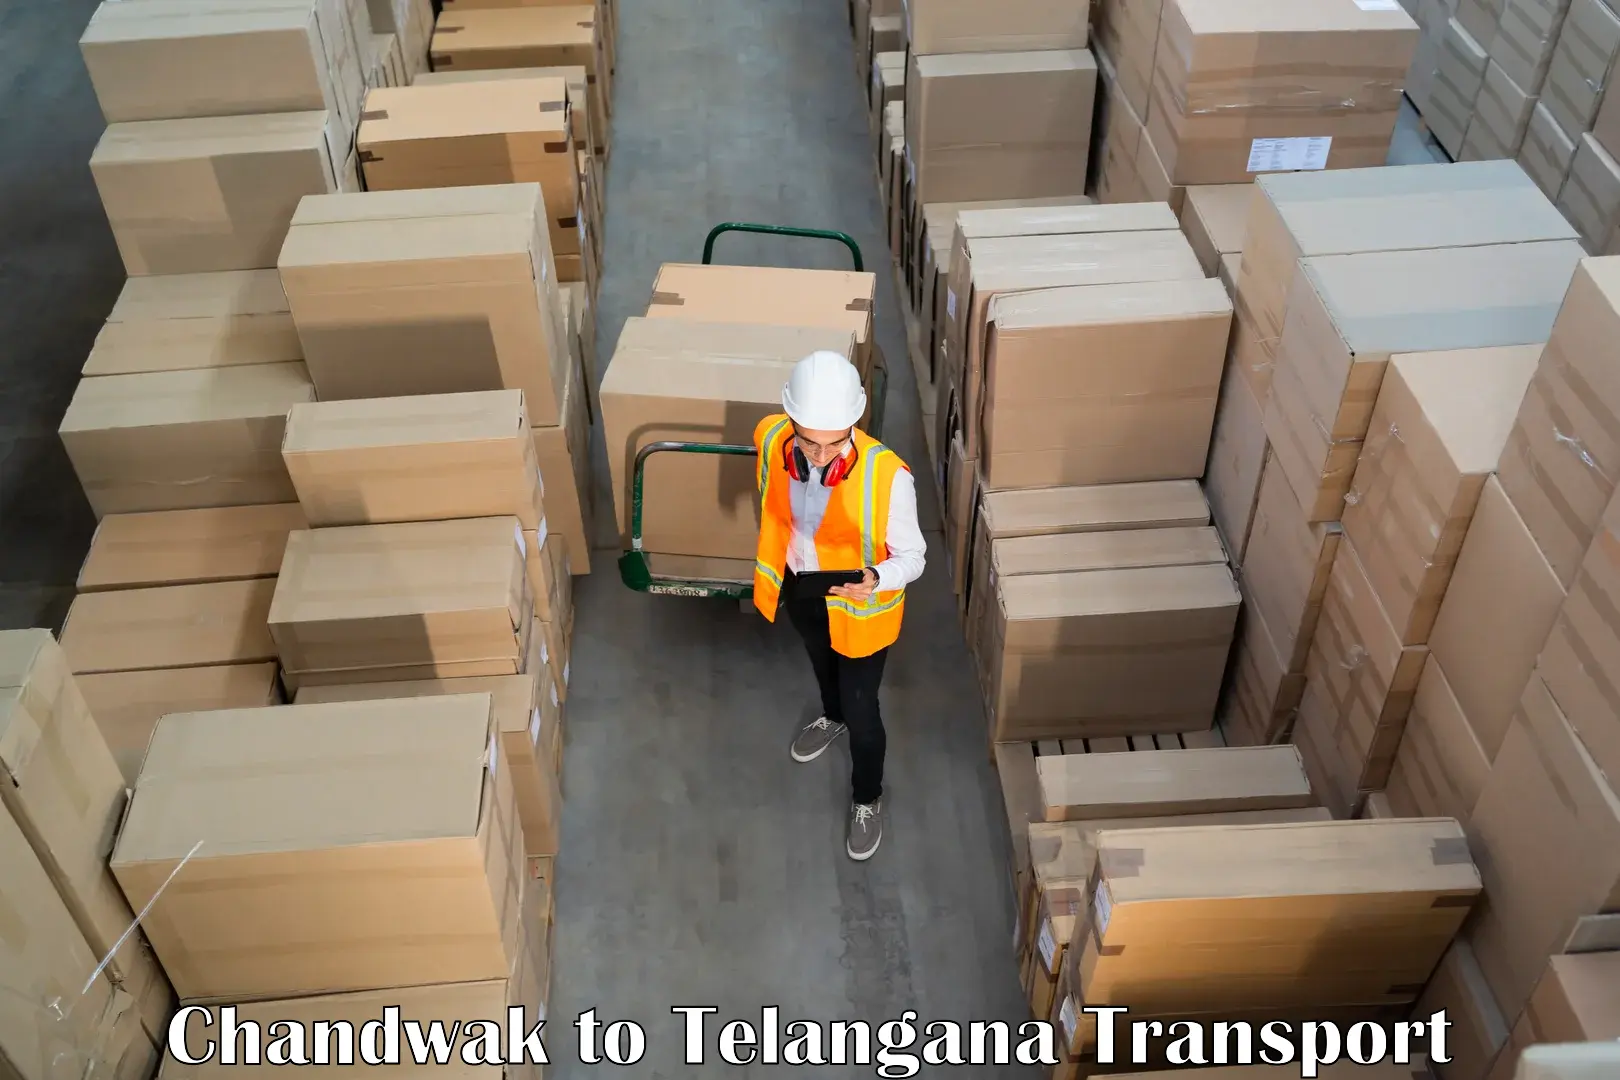 Air freight transport services in Chandwak to Ibrahimpatnam